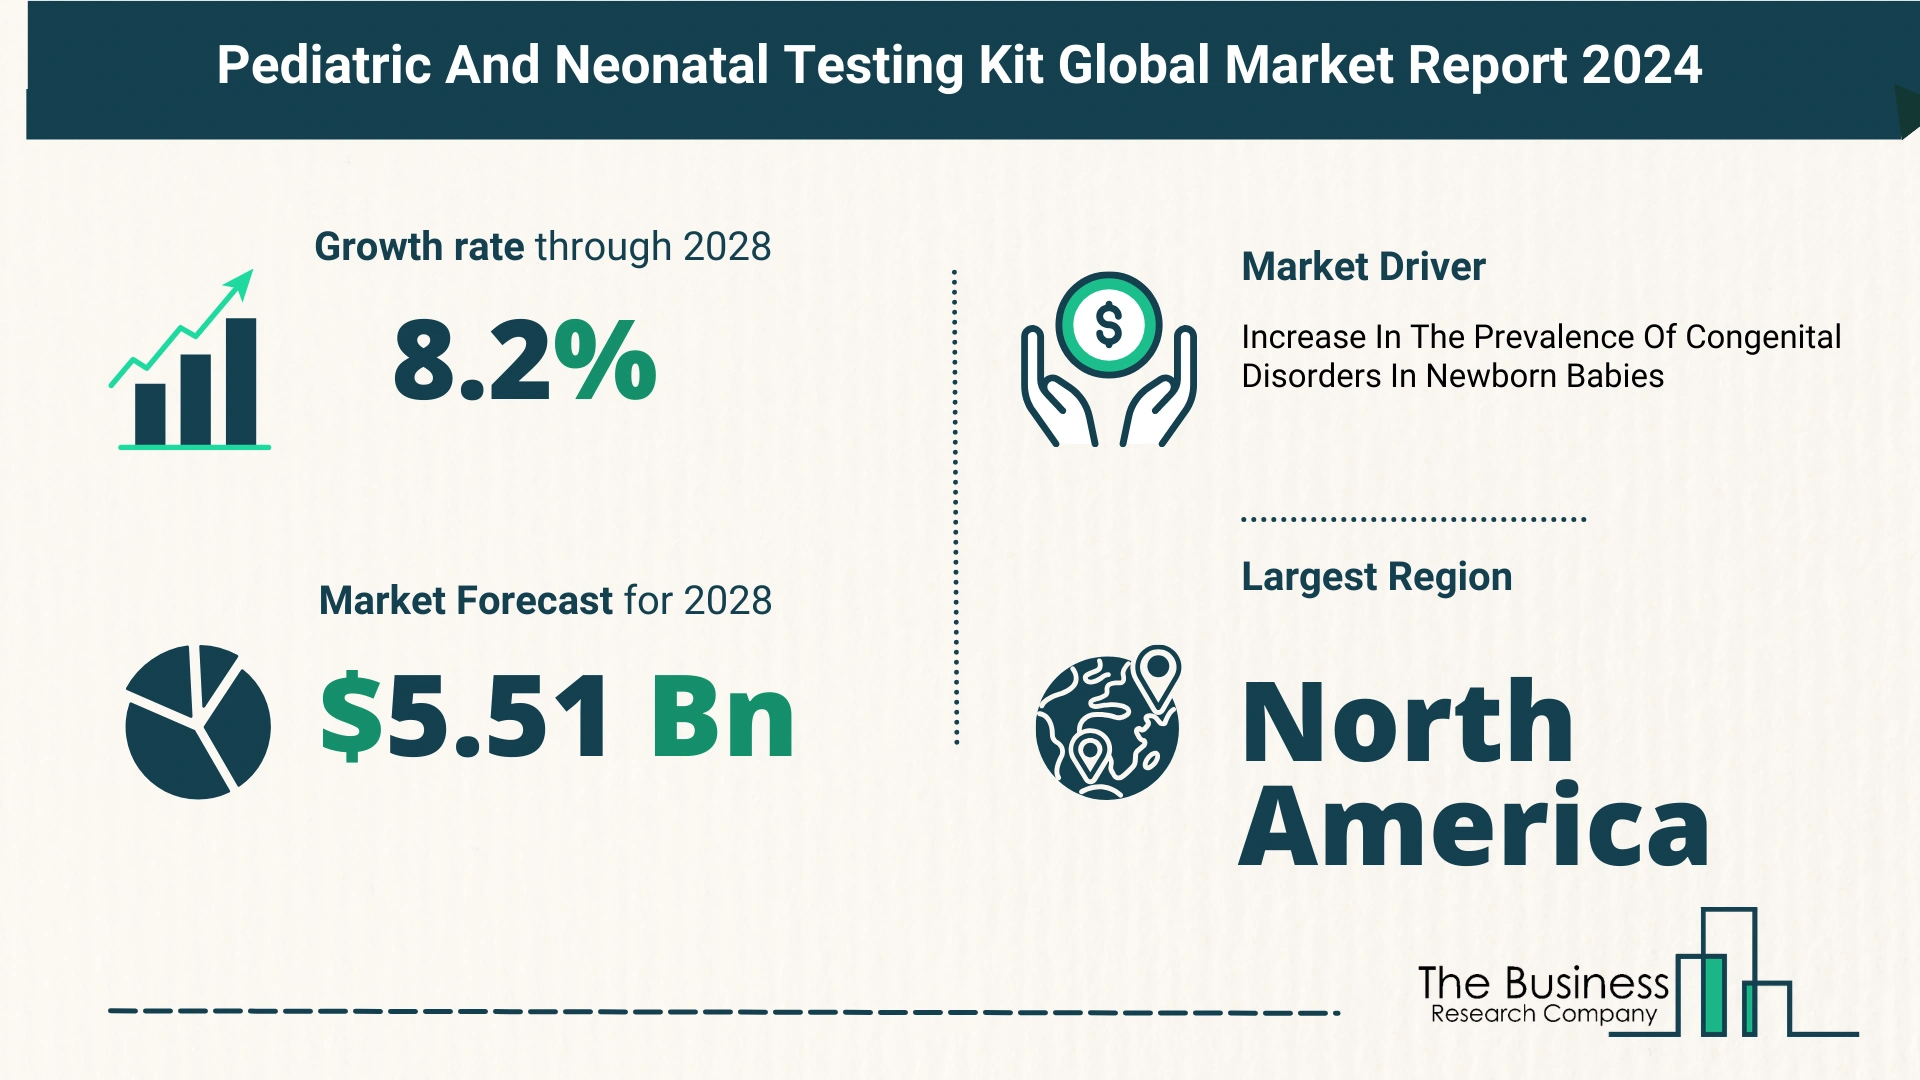 Top 5 Insights From The Pediatric And Neonatal Testing Kit Market Report 2024